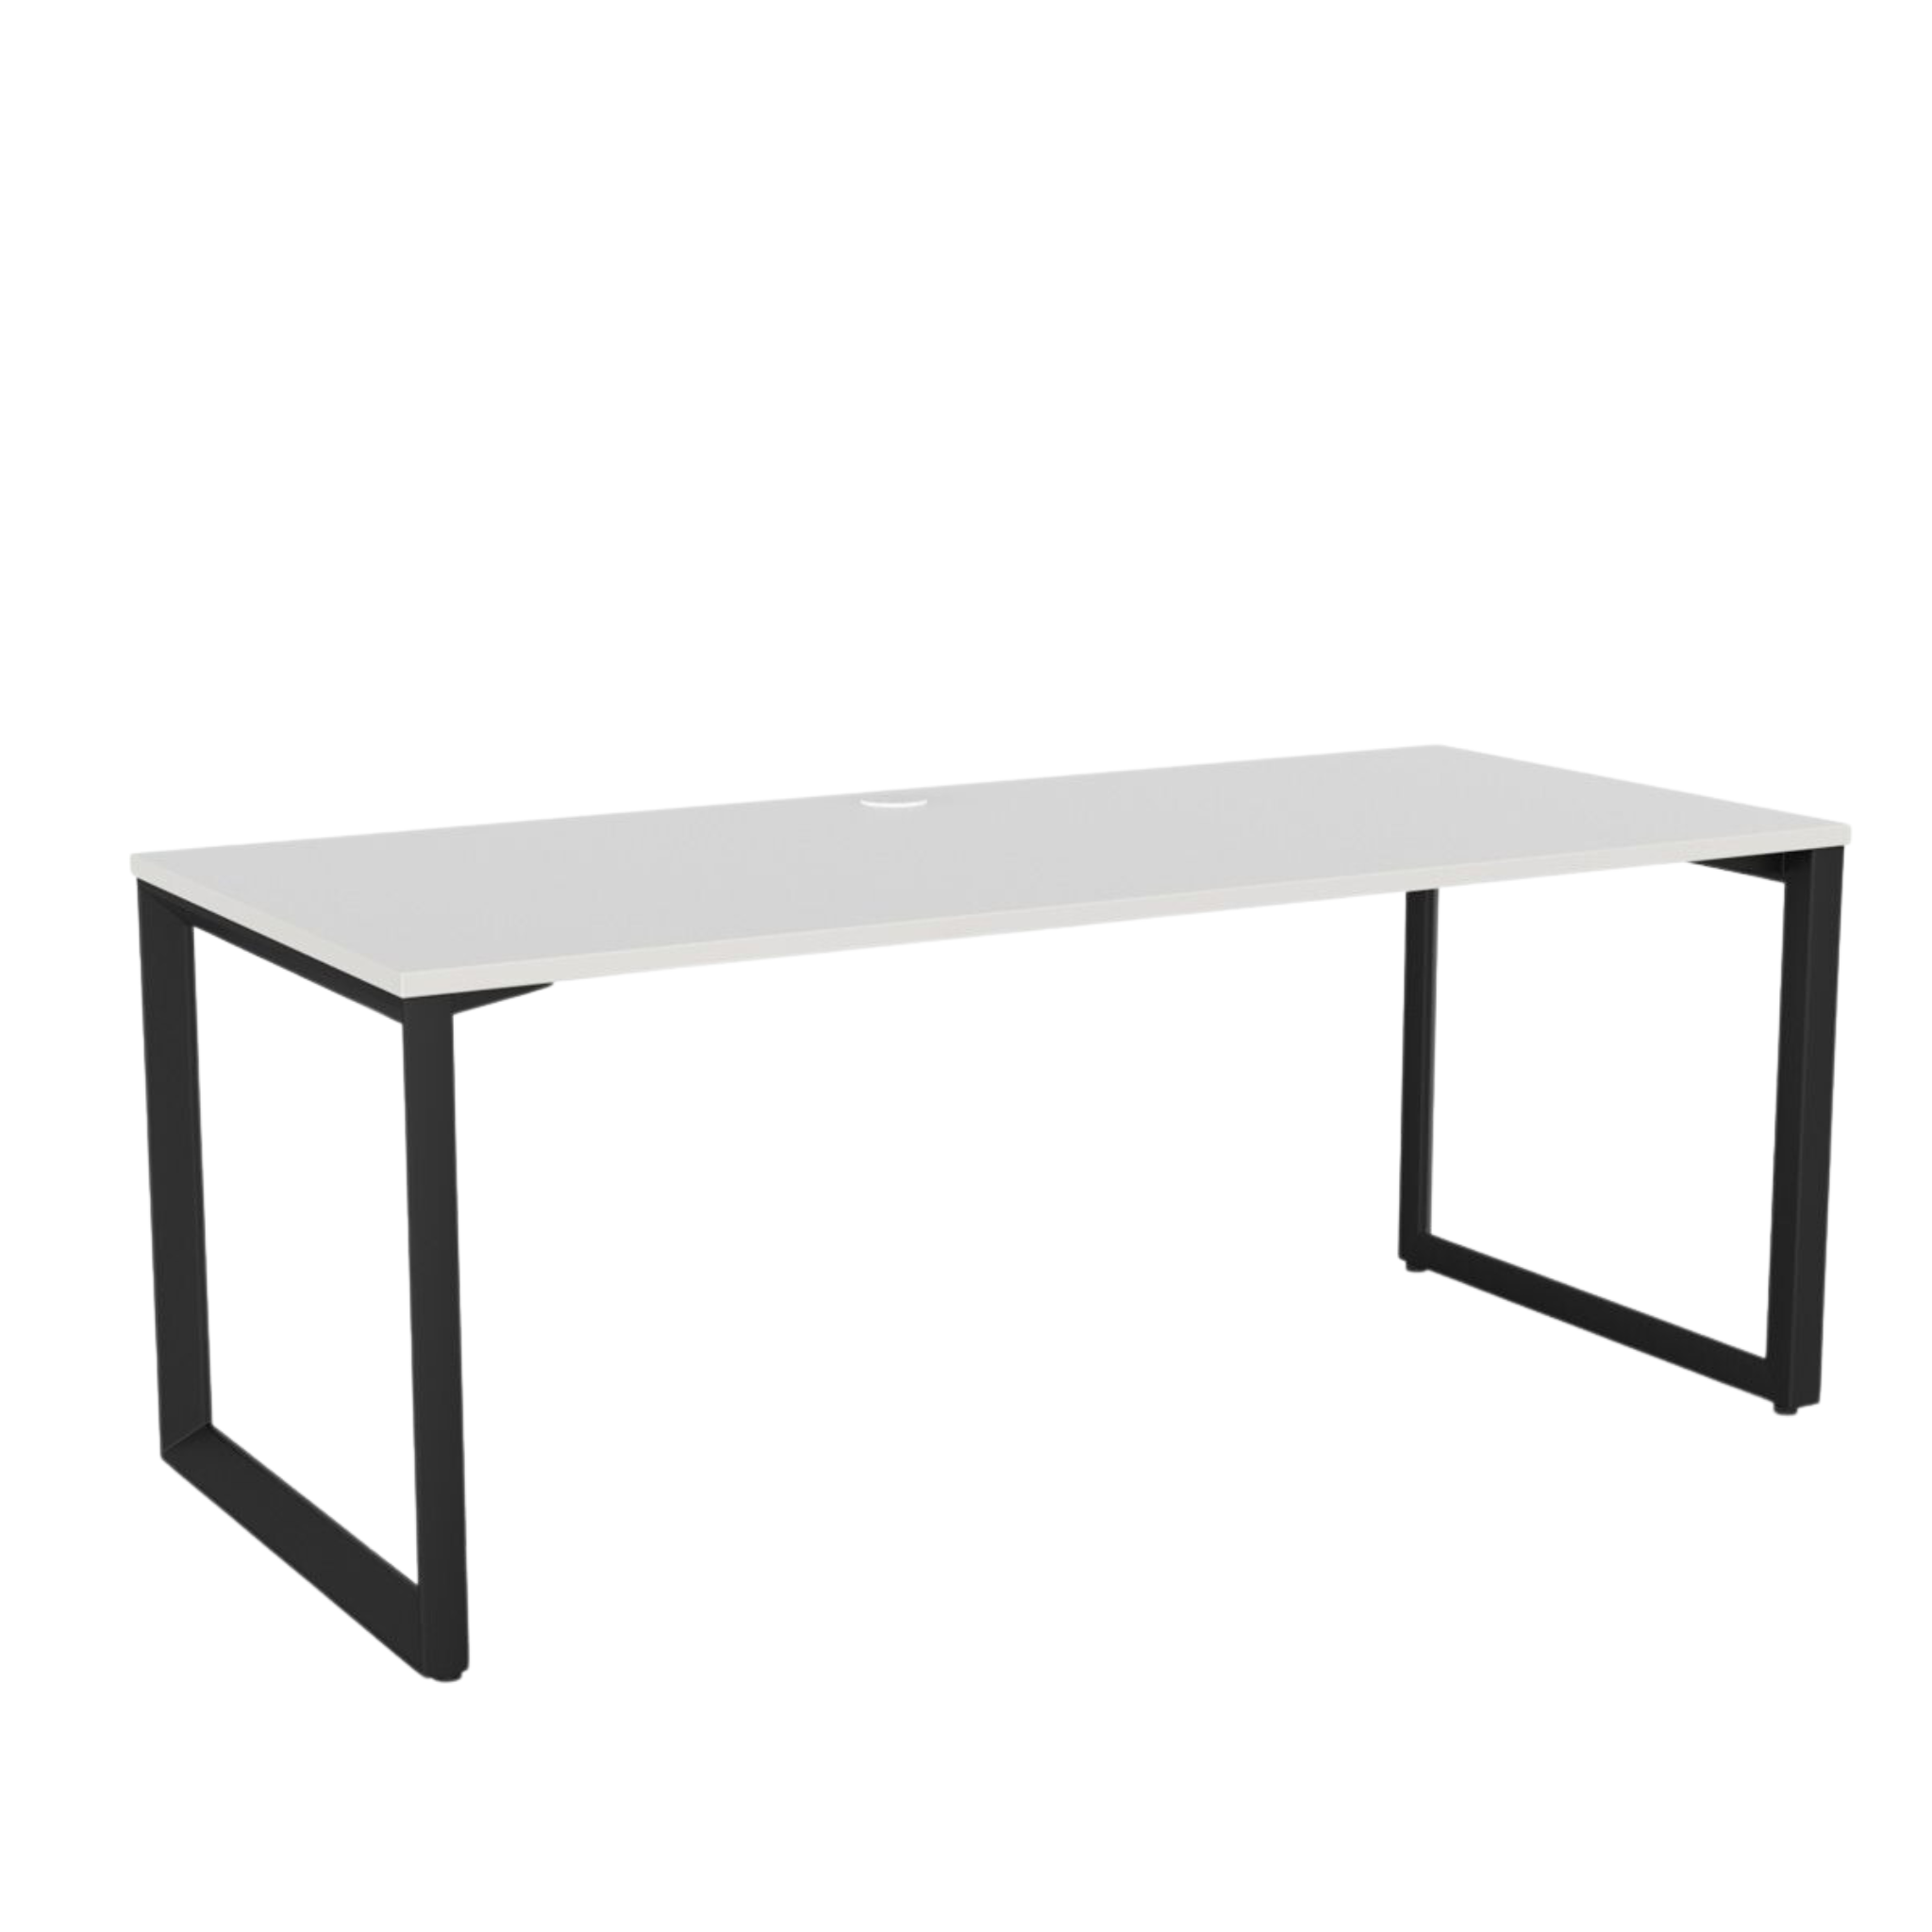 Anvil fixed height desk with black metal frame and white metleca top